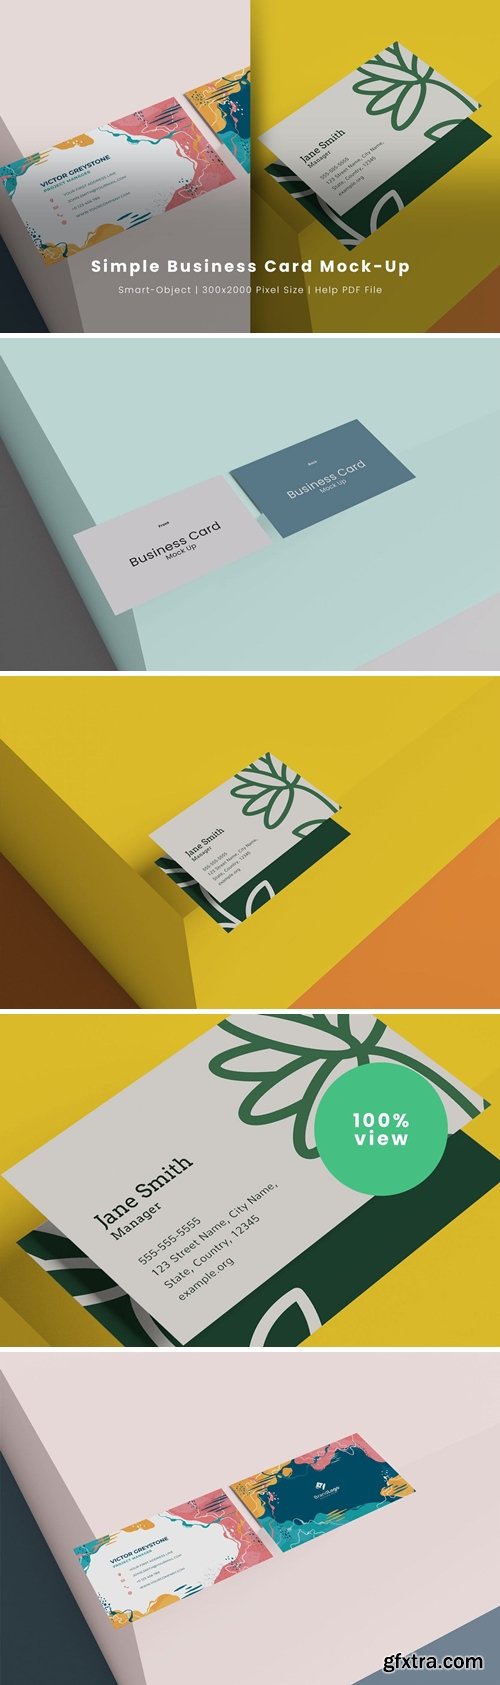 Simple Business Card Mock Up